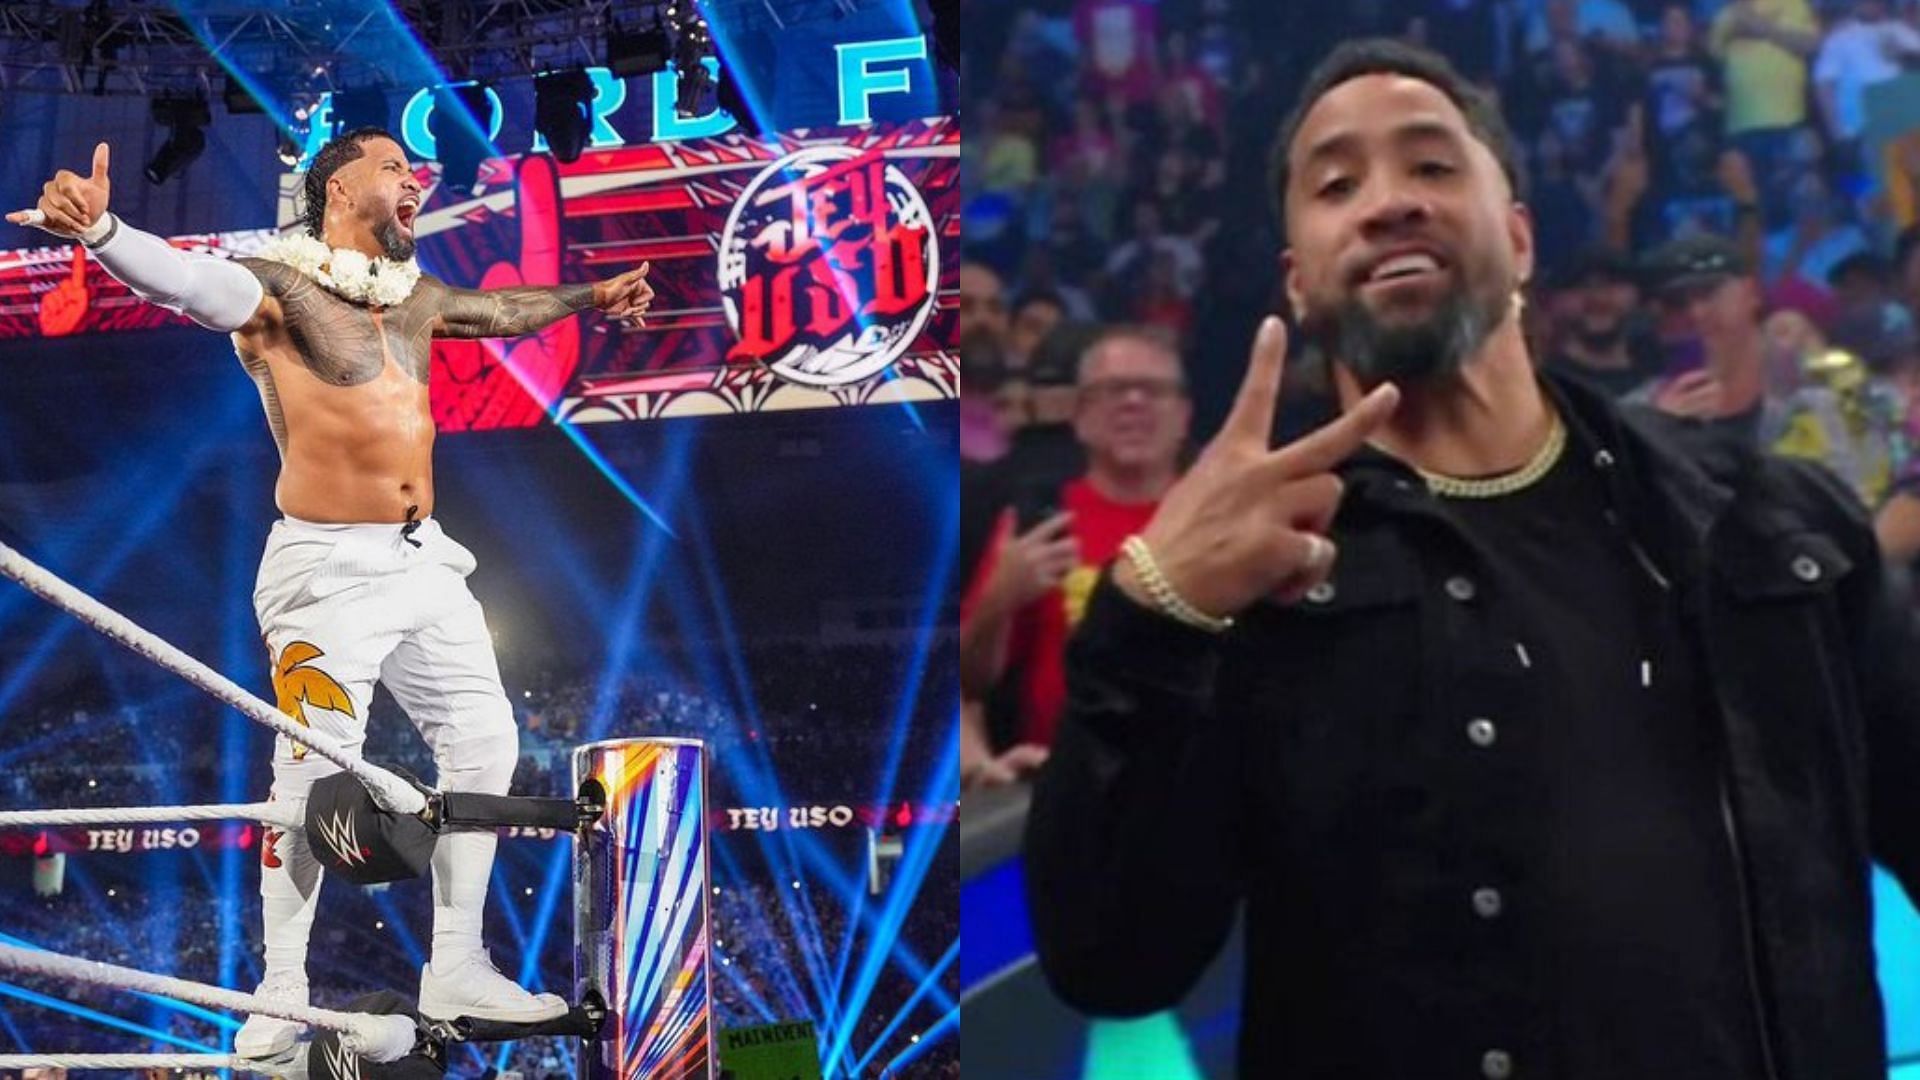 Jey Uso recently &quot;quit&quot; WWE after being betrayed his brother Jimmy